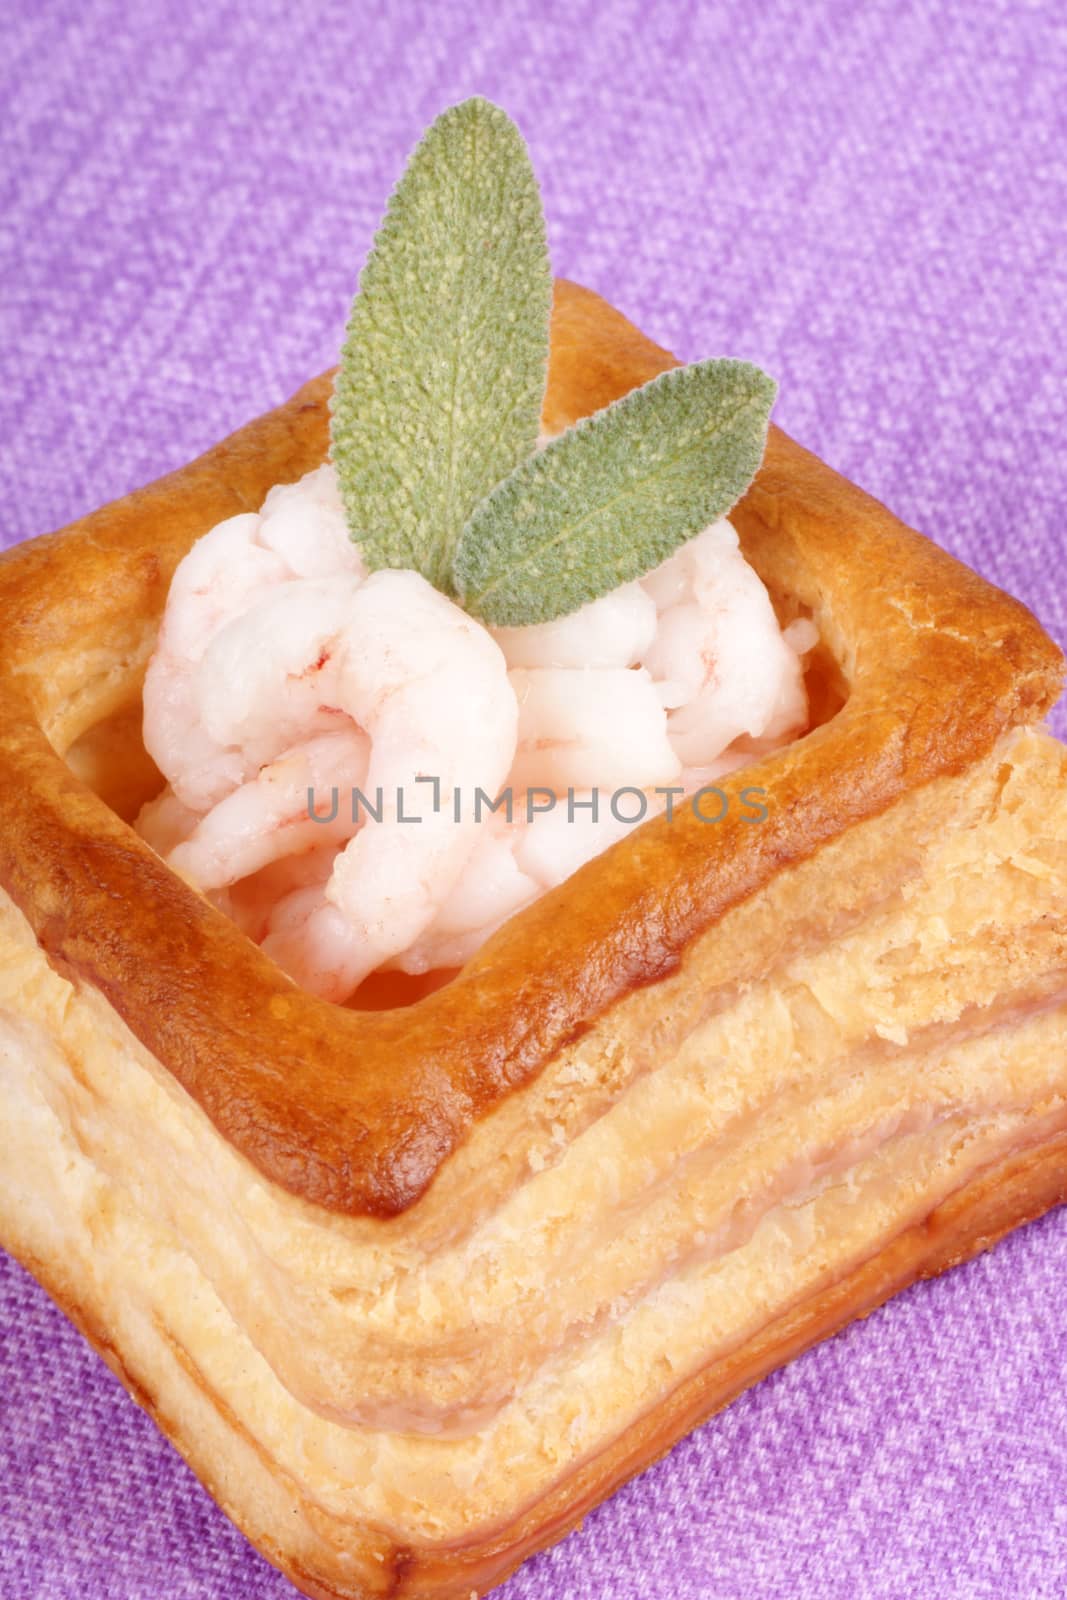 Vol-au-vent with small shrimps by citylights